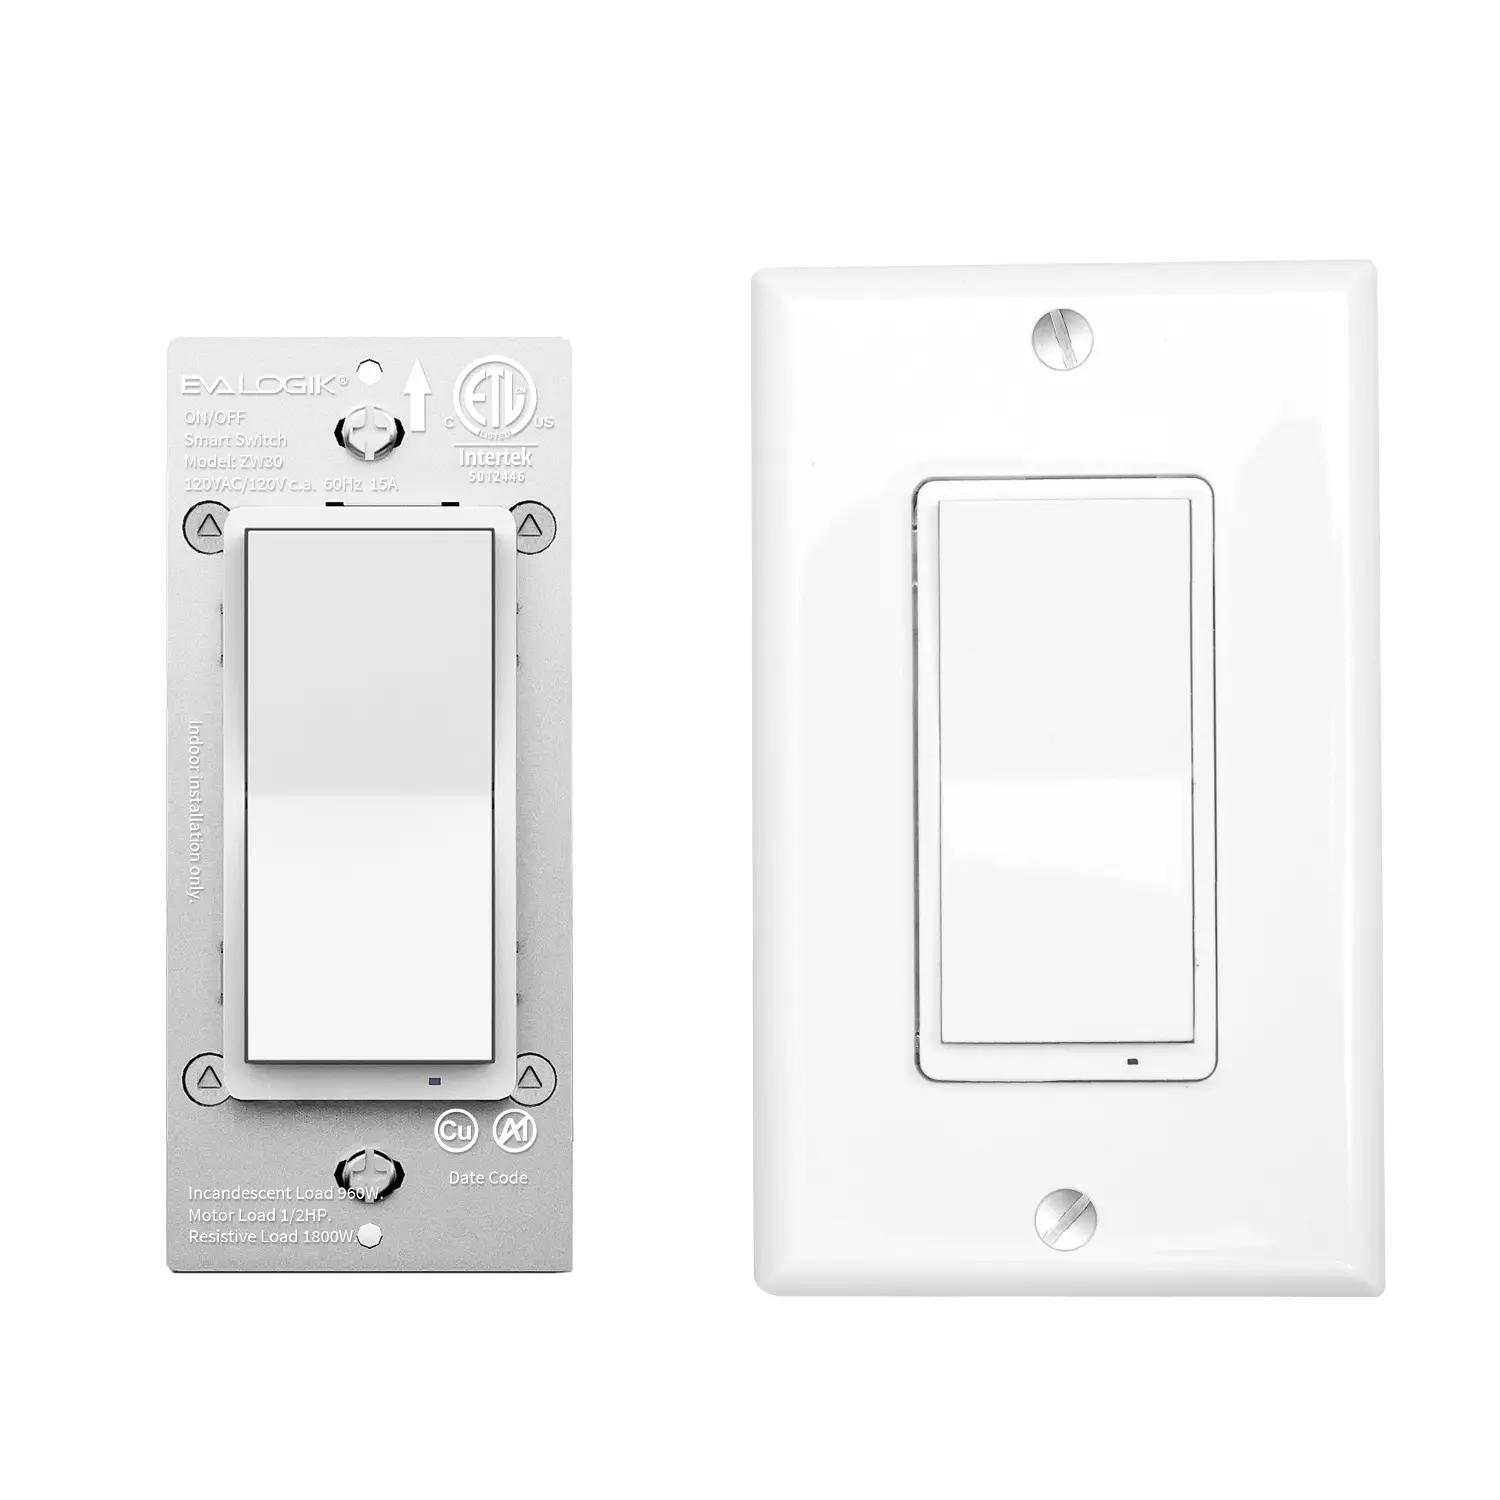 ZW30S Z-Wave Gen.2 Lower Profile Case 3-Way Smart ON/OFF Remote Control In-Wall Switch